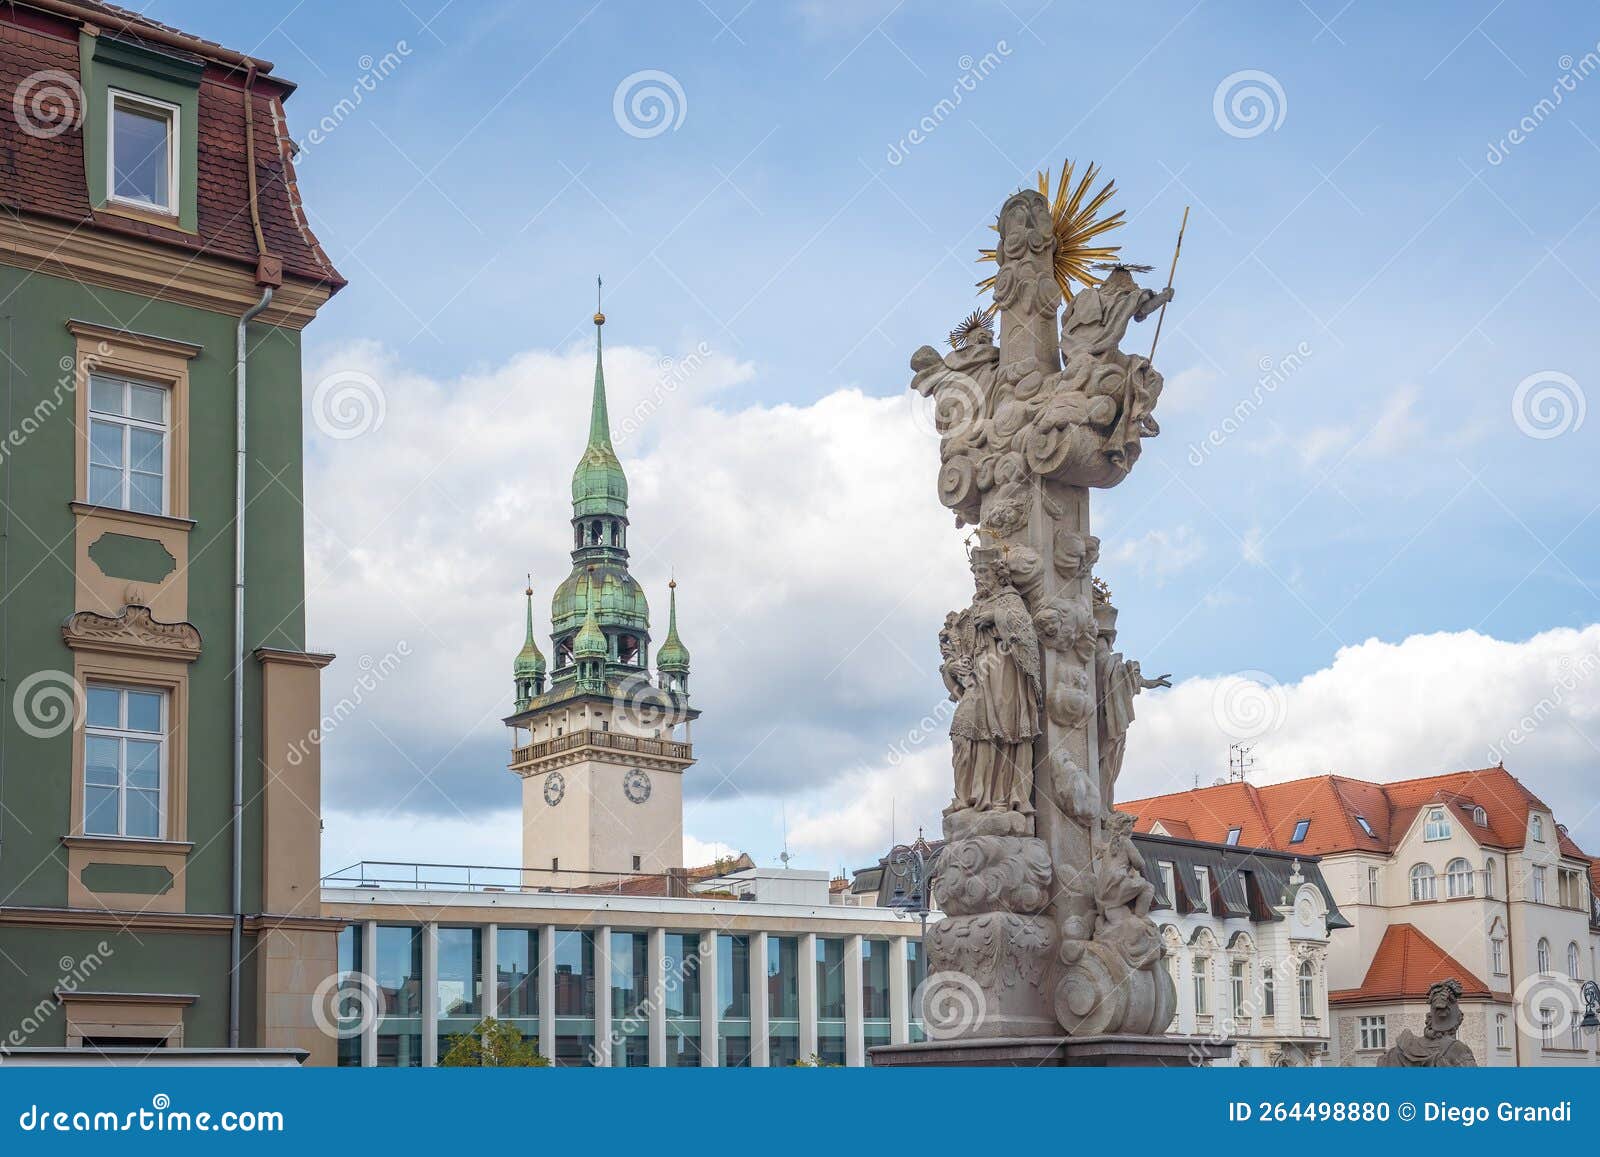 holy trinity column at cabbage market square zelny trh and old town hall tower - brno, czech republic